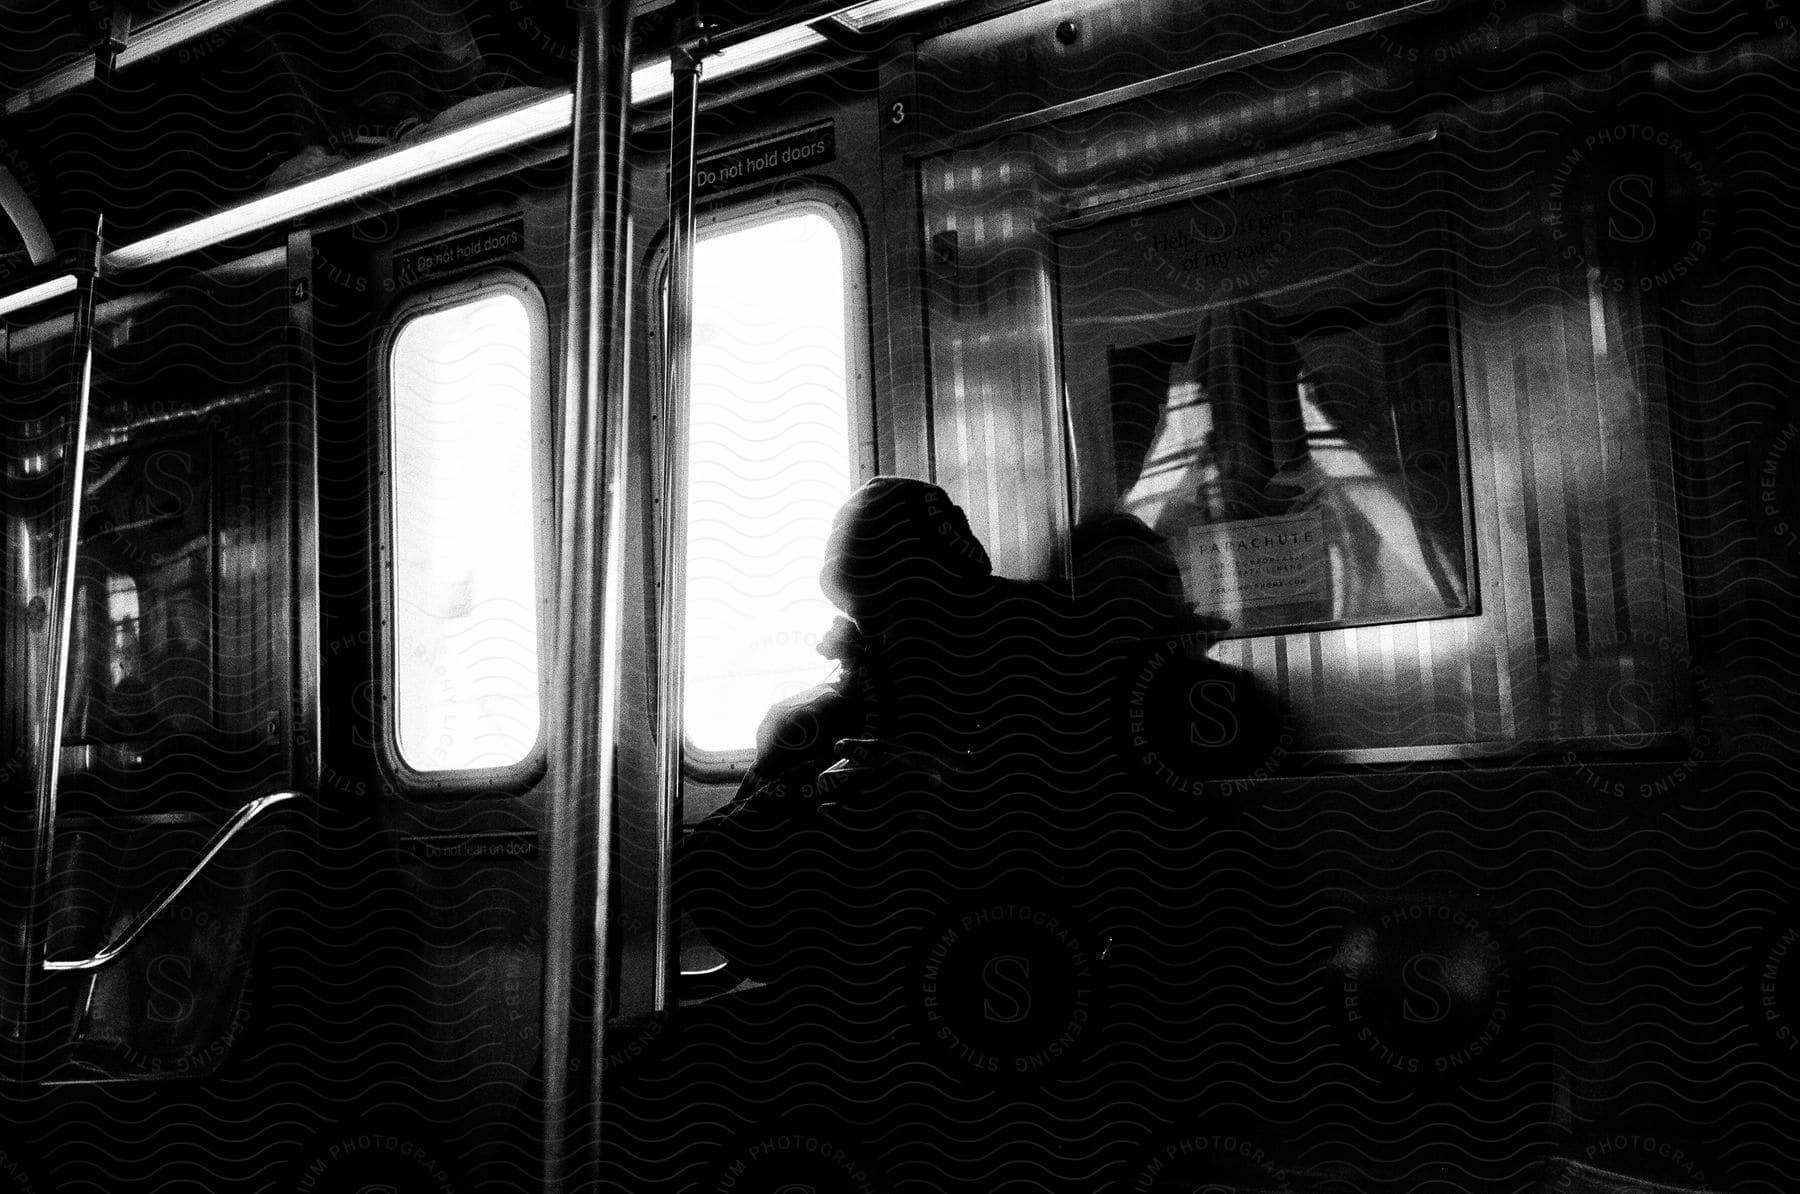 A person sitting on a subway car